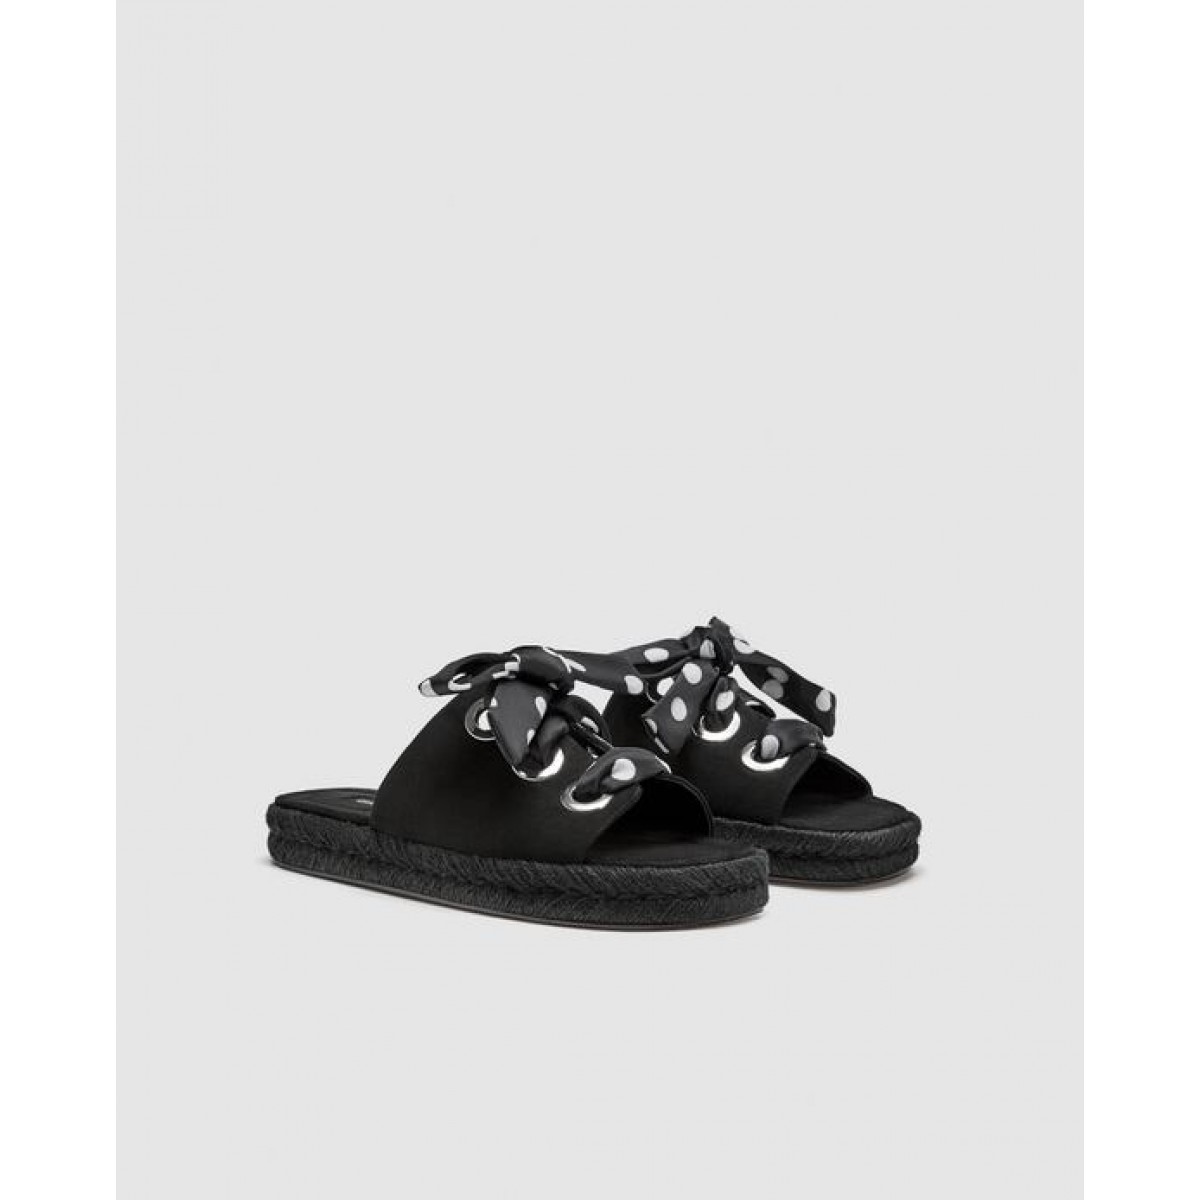 Zara Ladies Flat Shoes With Polka Dot Laces